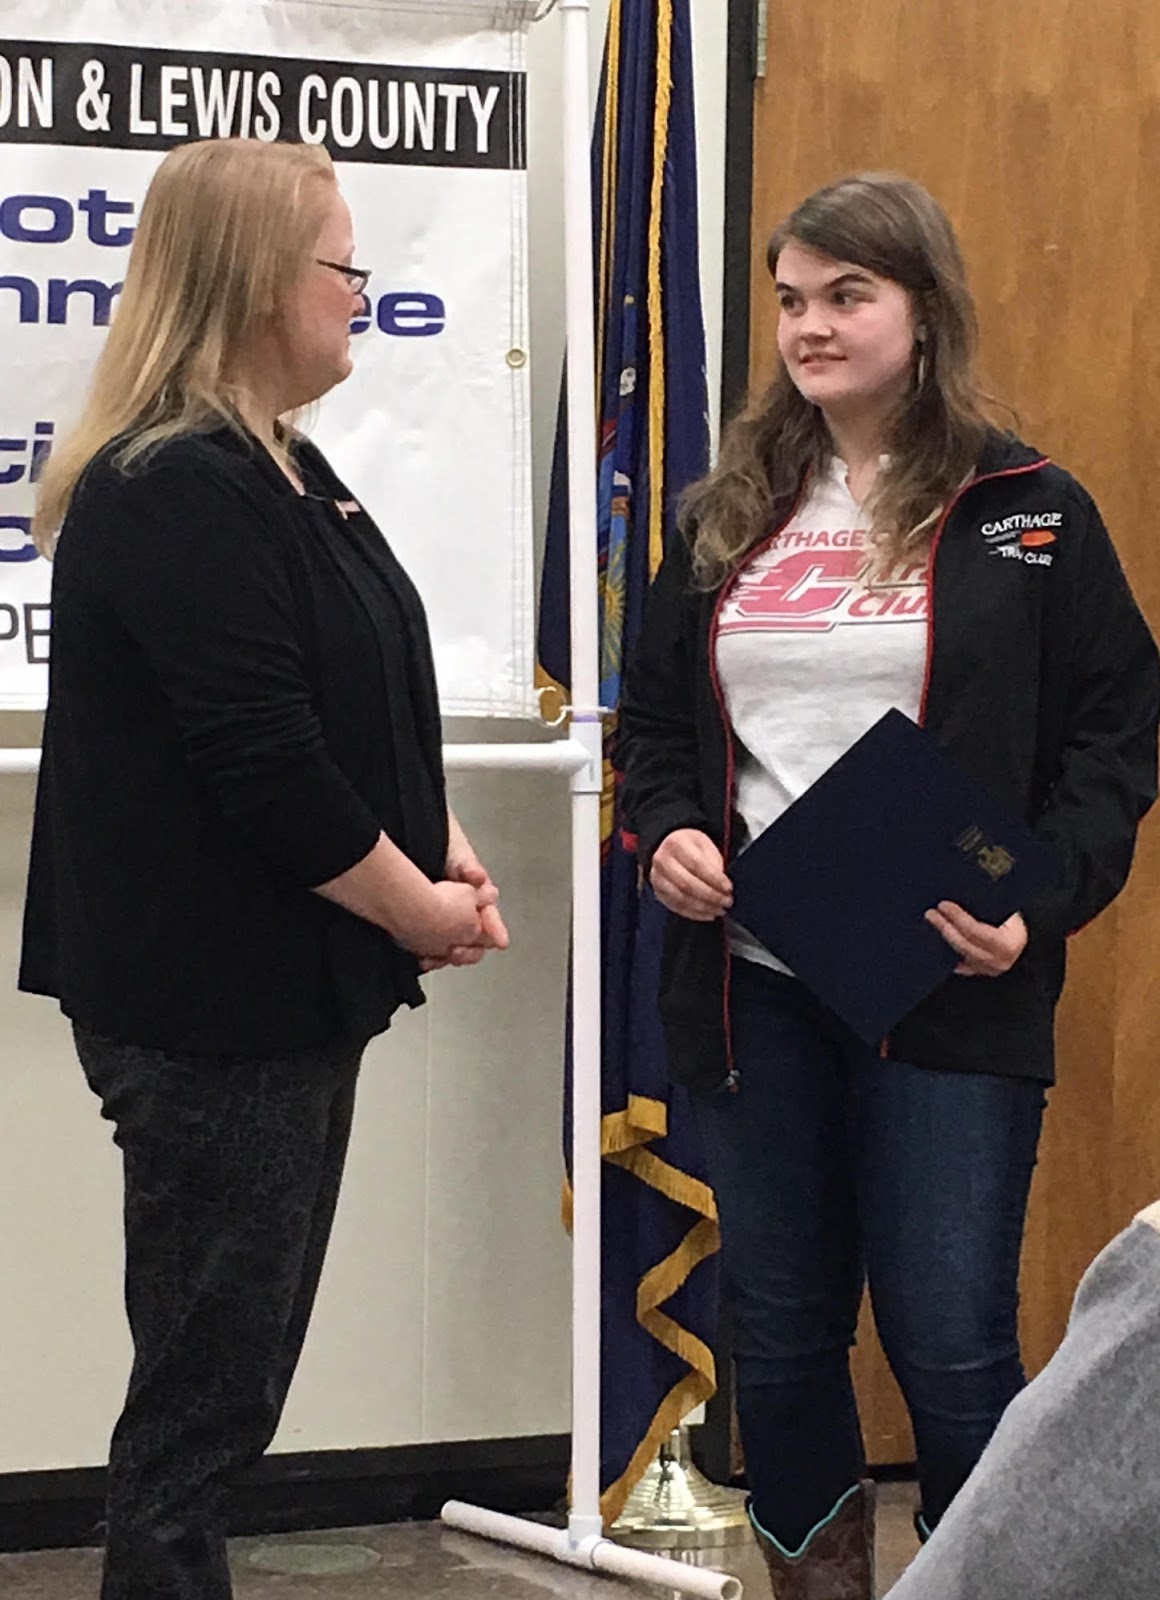 Assemblywoman Addie A.E. Jenne congratulates Carthage High School student Monica Reed for taking top honors in the Jefferson-Lewis Counties chapter of SCOPE essay writing contest